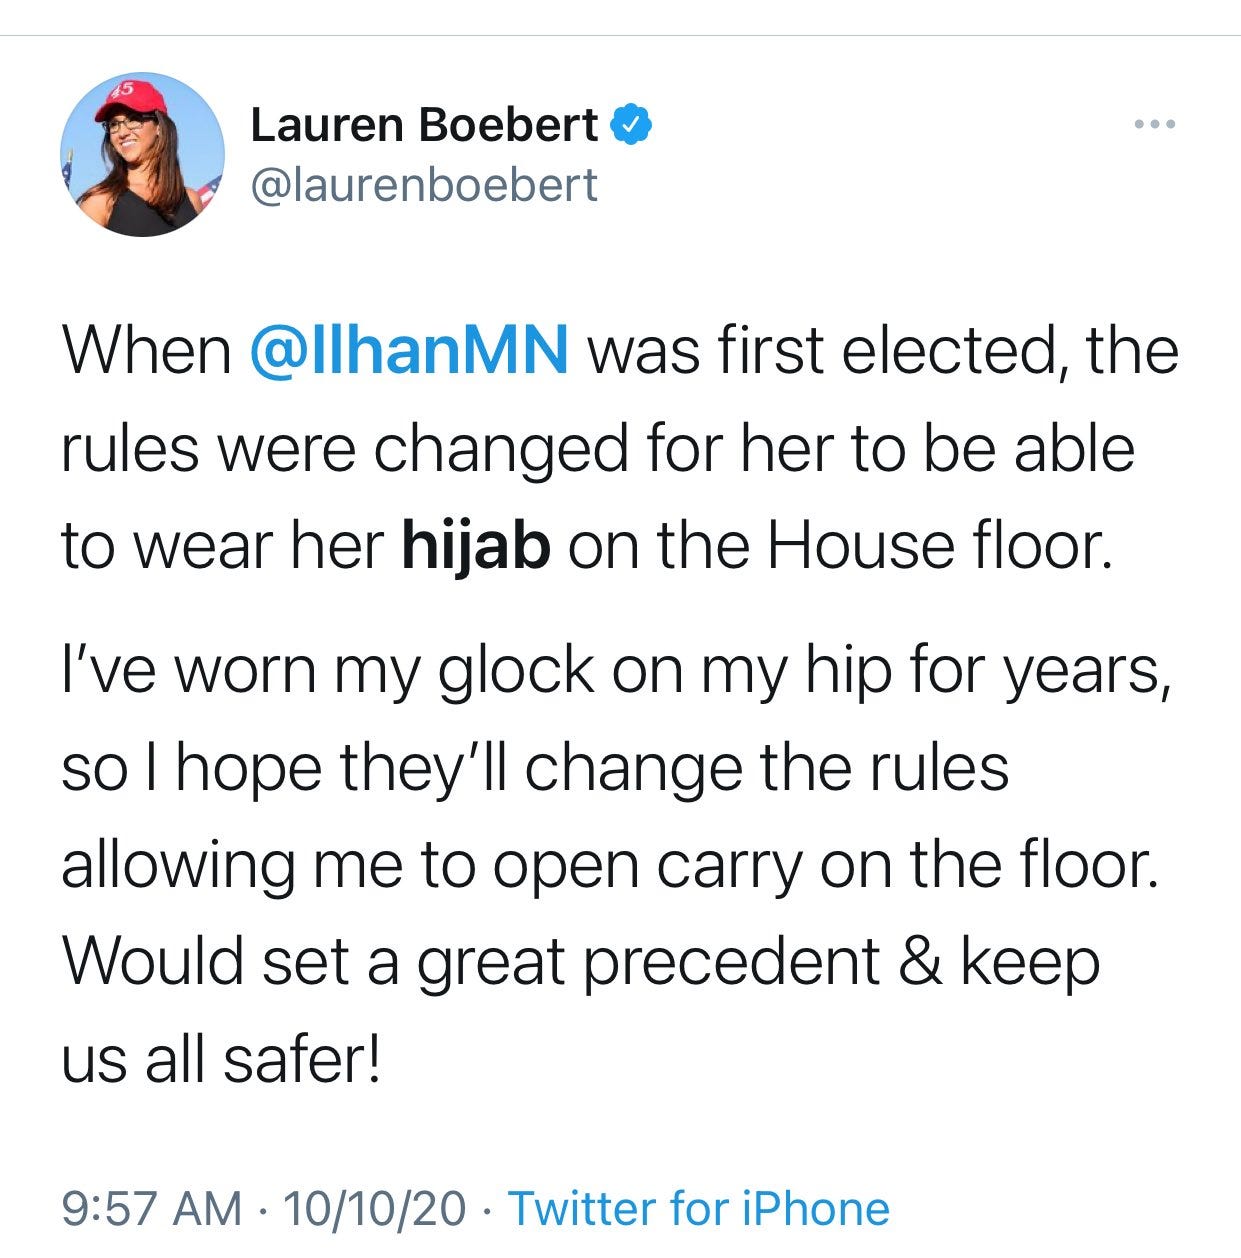 Tweet by Lauren Boebert When @IlhanMN was first elected, the rules were changed for her to be able to wear her hijab on the House floor.

I’ve worn my glock on my hip for years, so I hope they’ll change the rules allowing me to open carry on the floor. Would set a great precedent & keep us all safer!